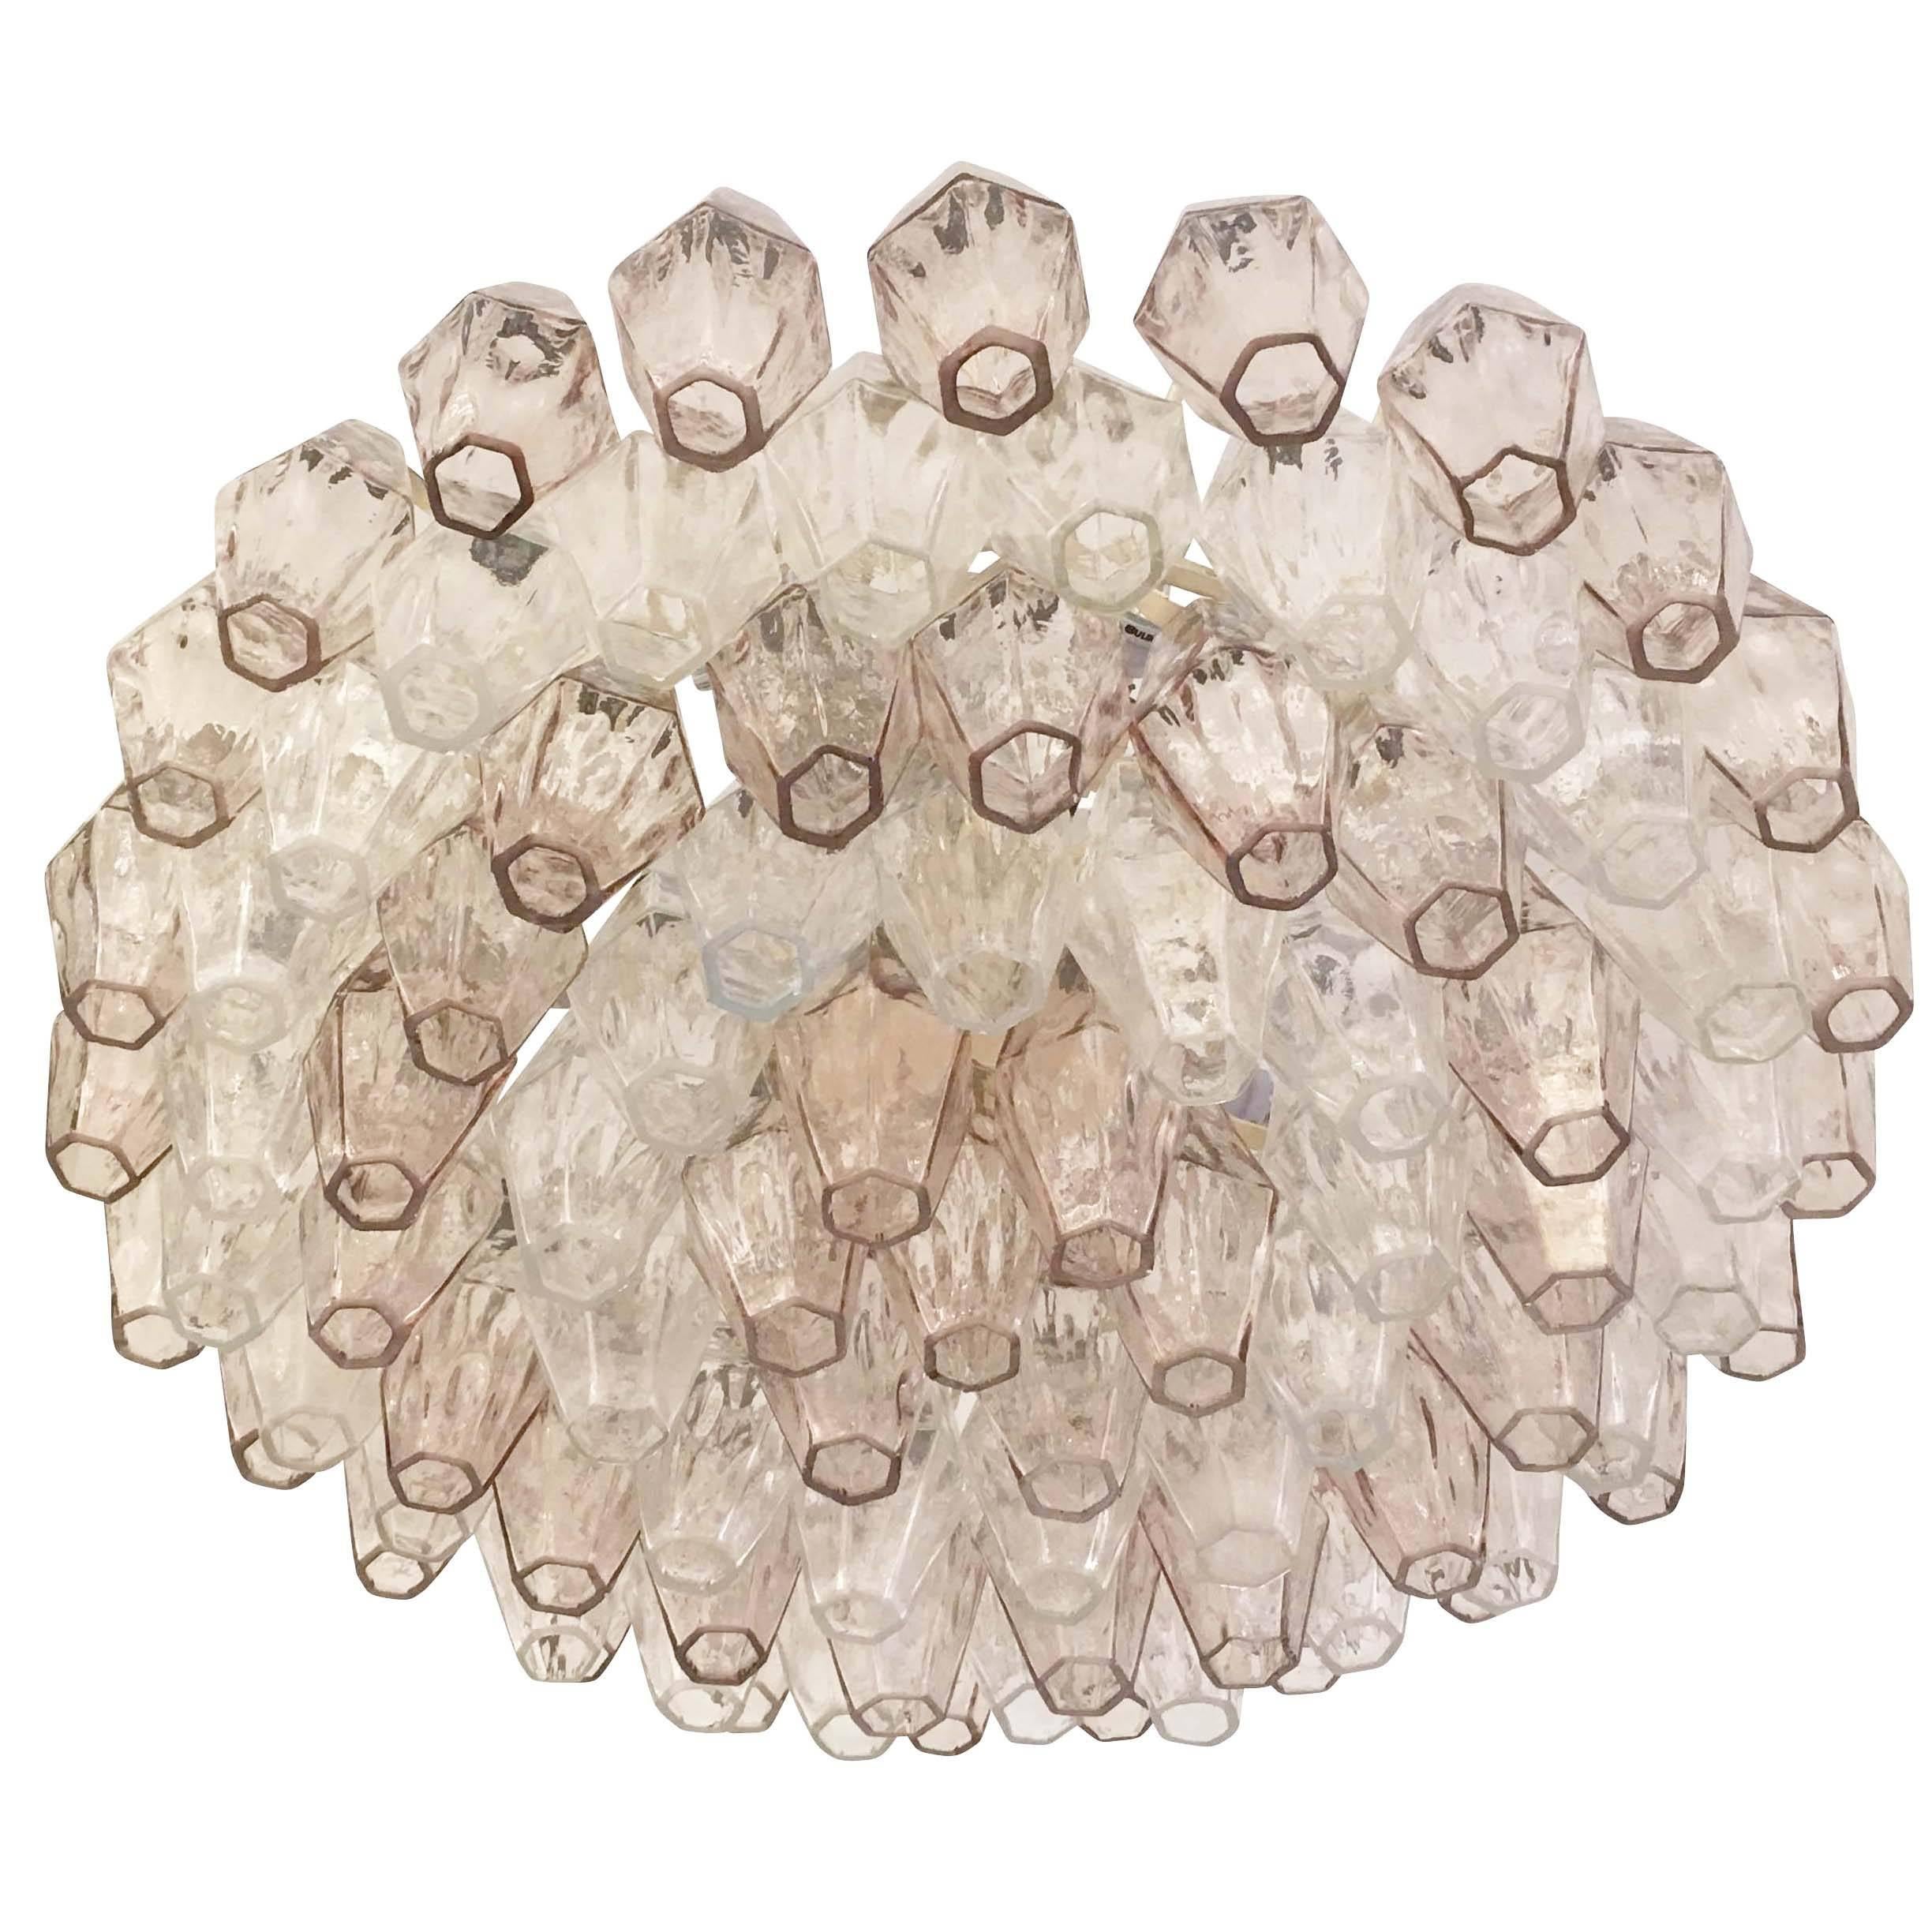 Original polyhedral chandelier made by Venini in the 1960s. This timeless Murano fixture has alternating rows of clear and light pink glasses on an off-white frame. Additional clear poliedri are available if needed with all clear glasses. Can be